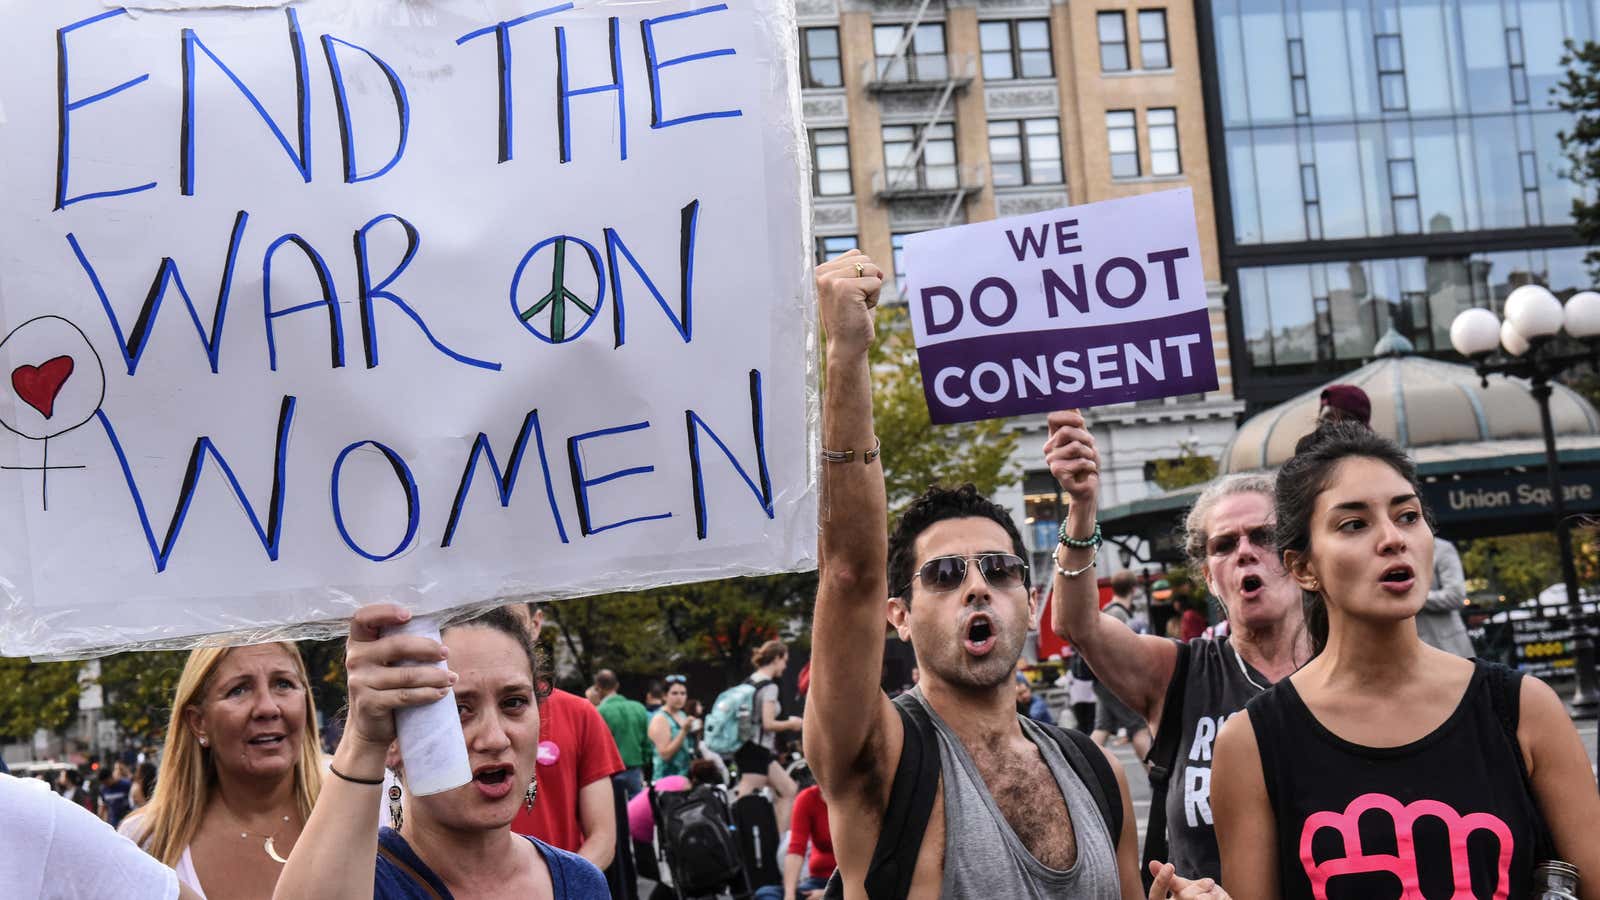 People participate in a protest in support of women’s reproductive rights, in New York City, U.S., October 7, 2017.